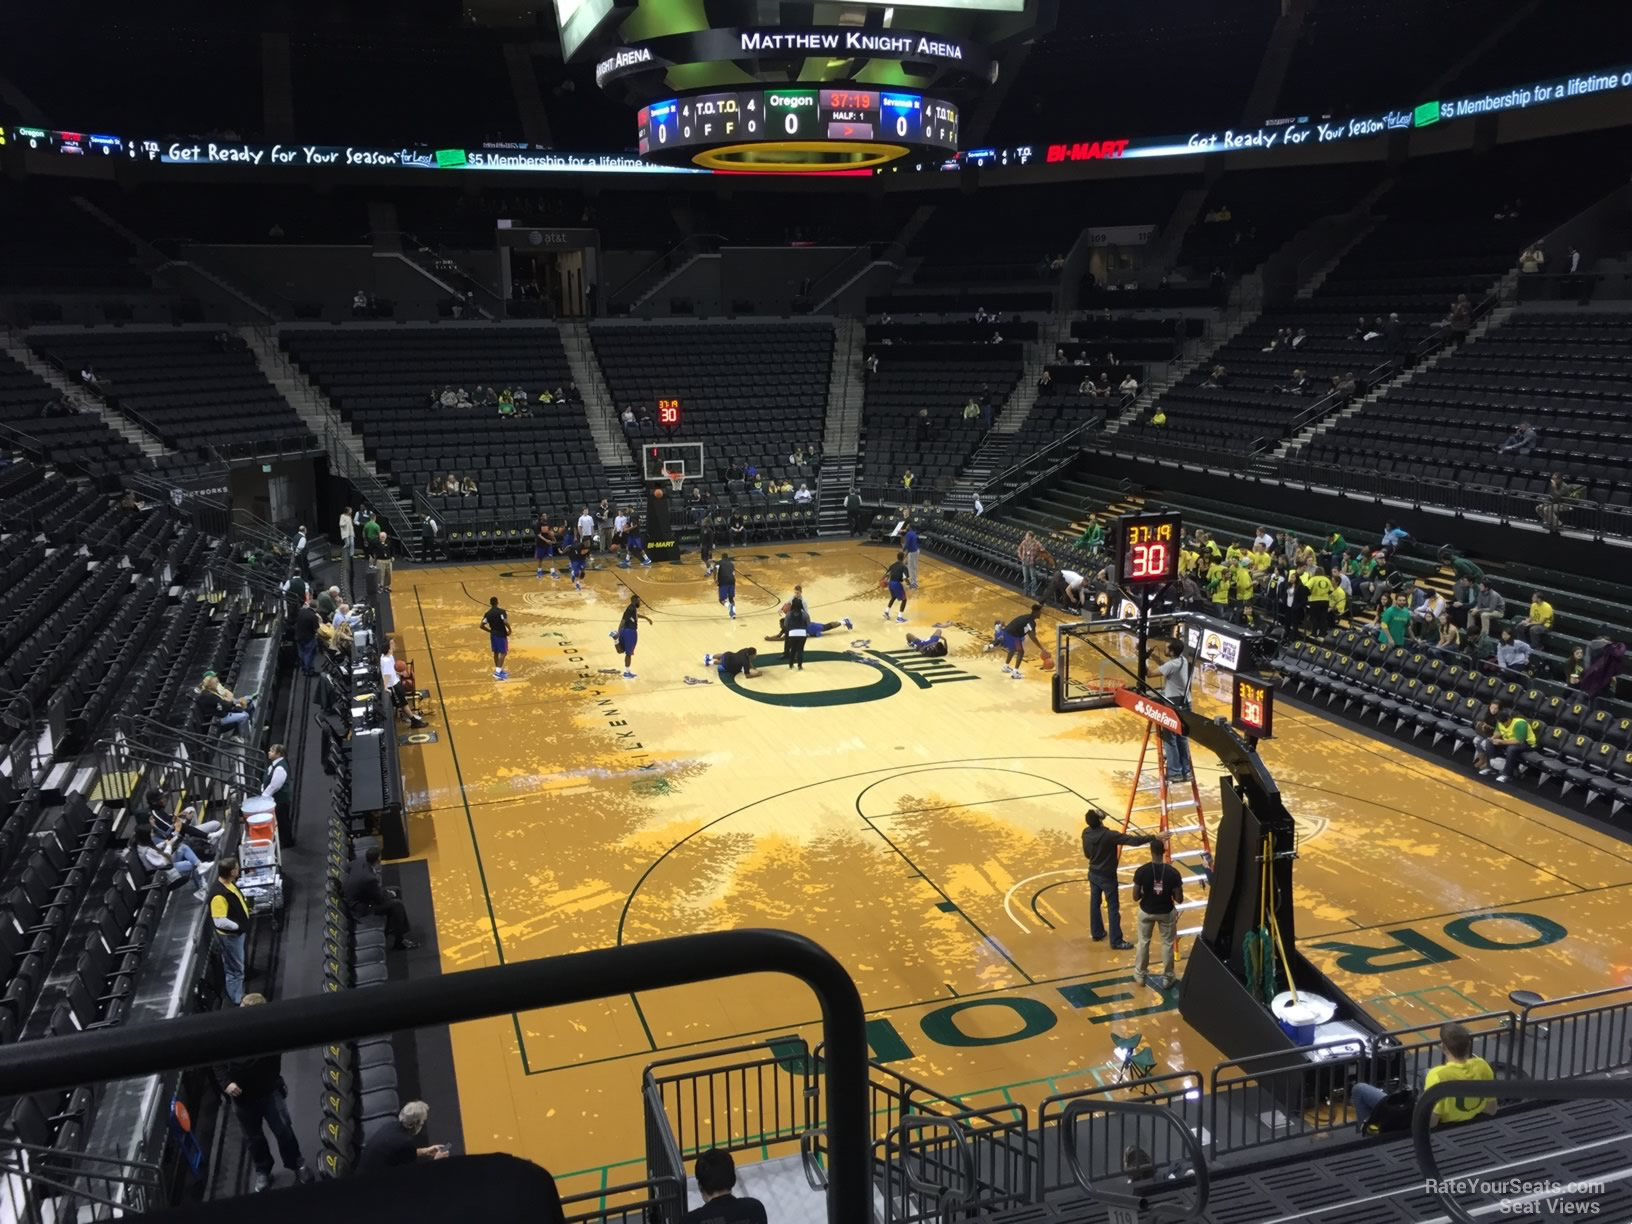 section 119, row ff seat view  - matthew knight arena